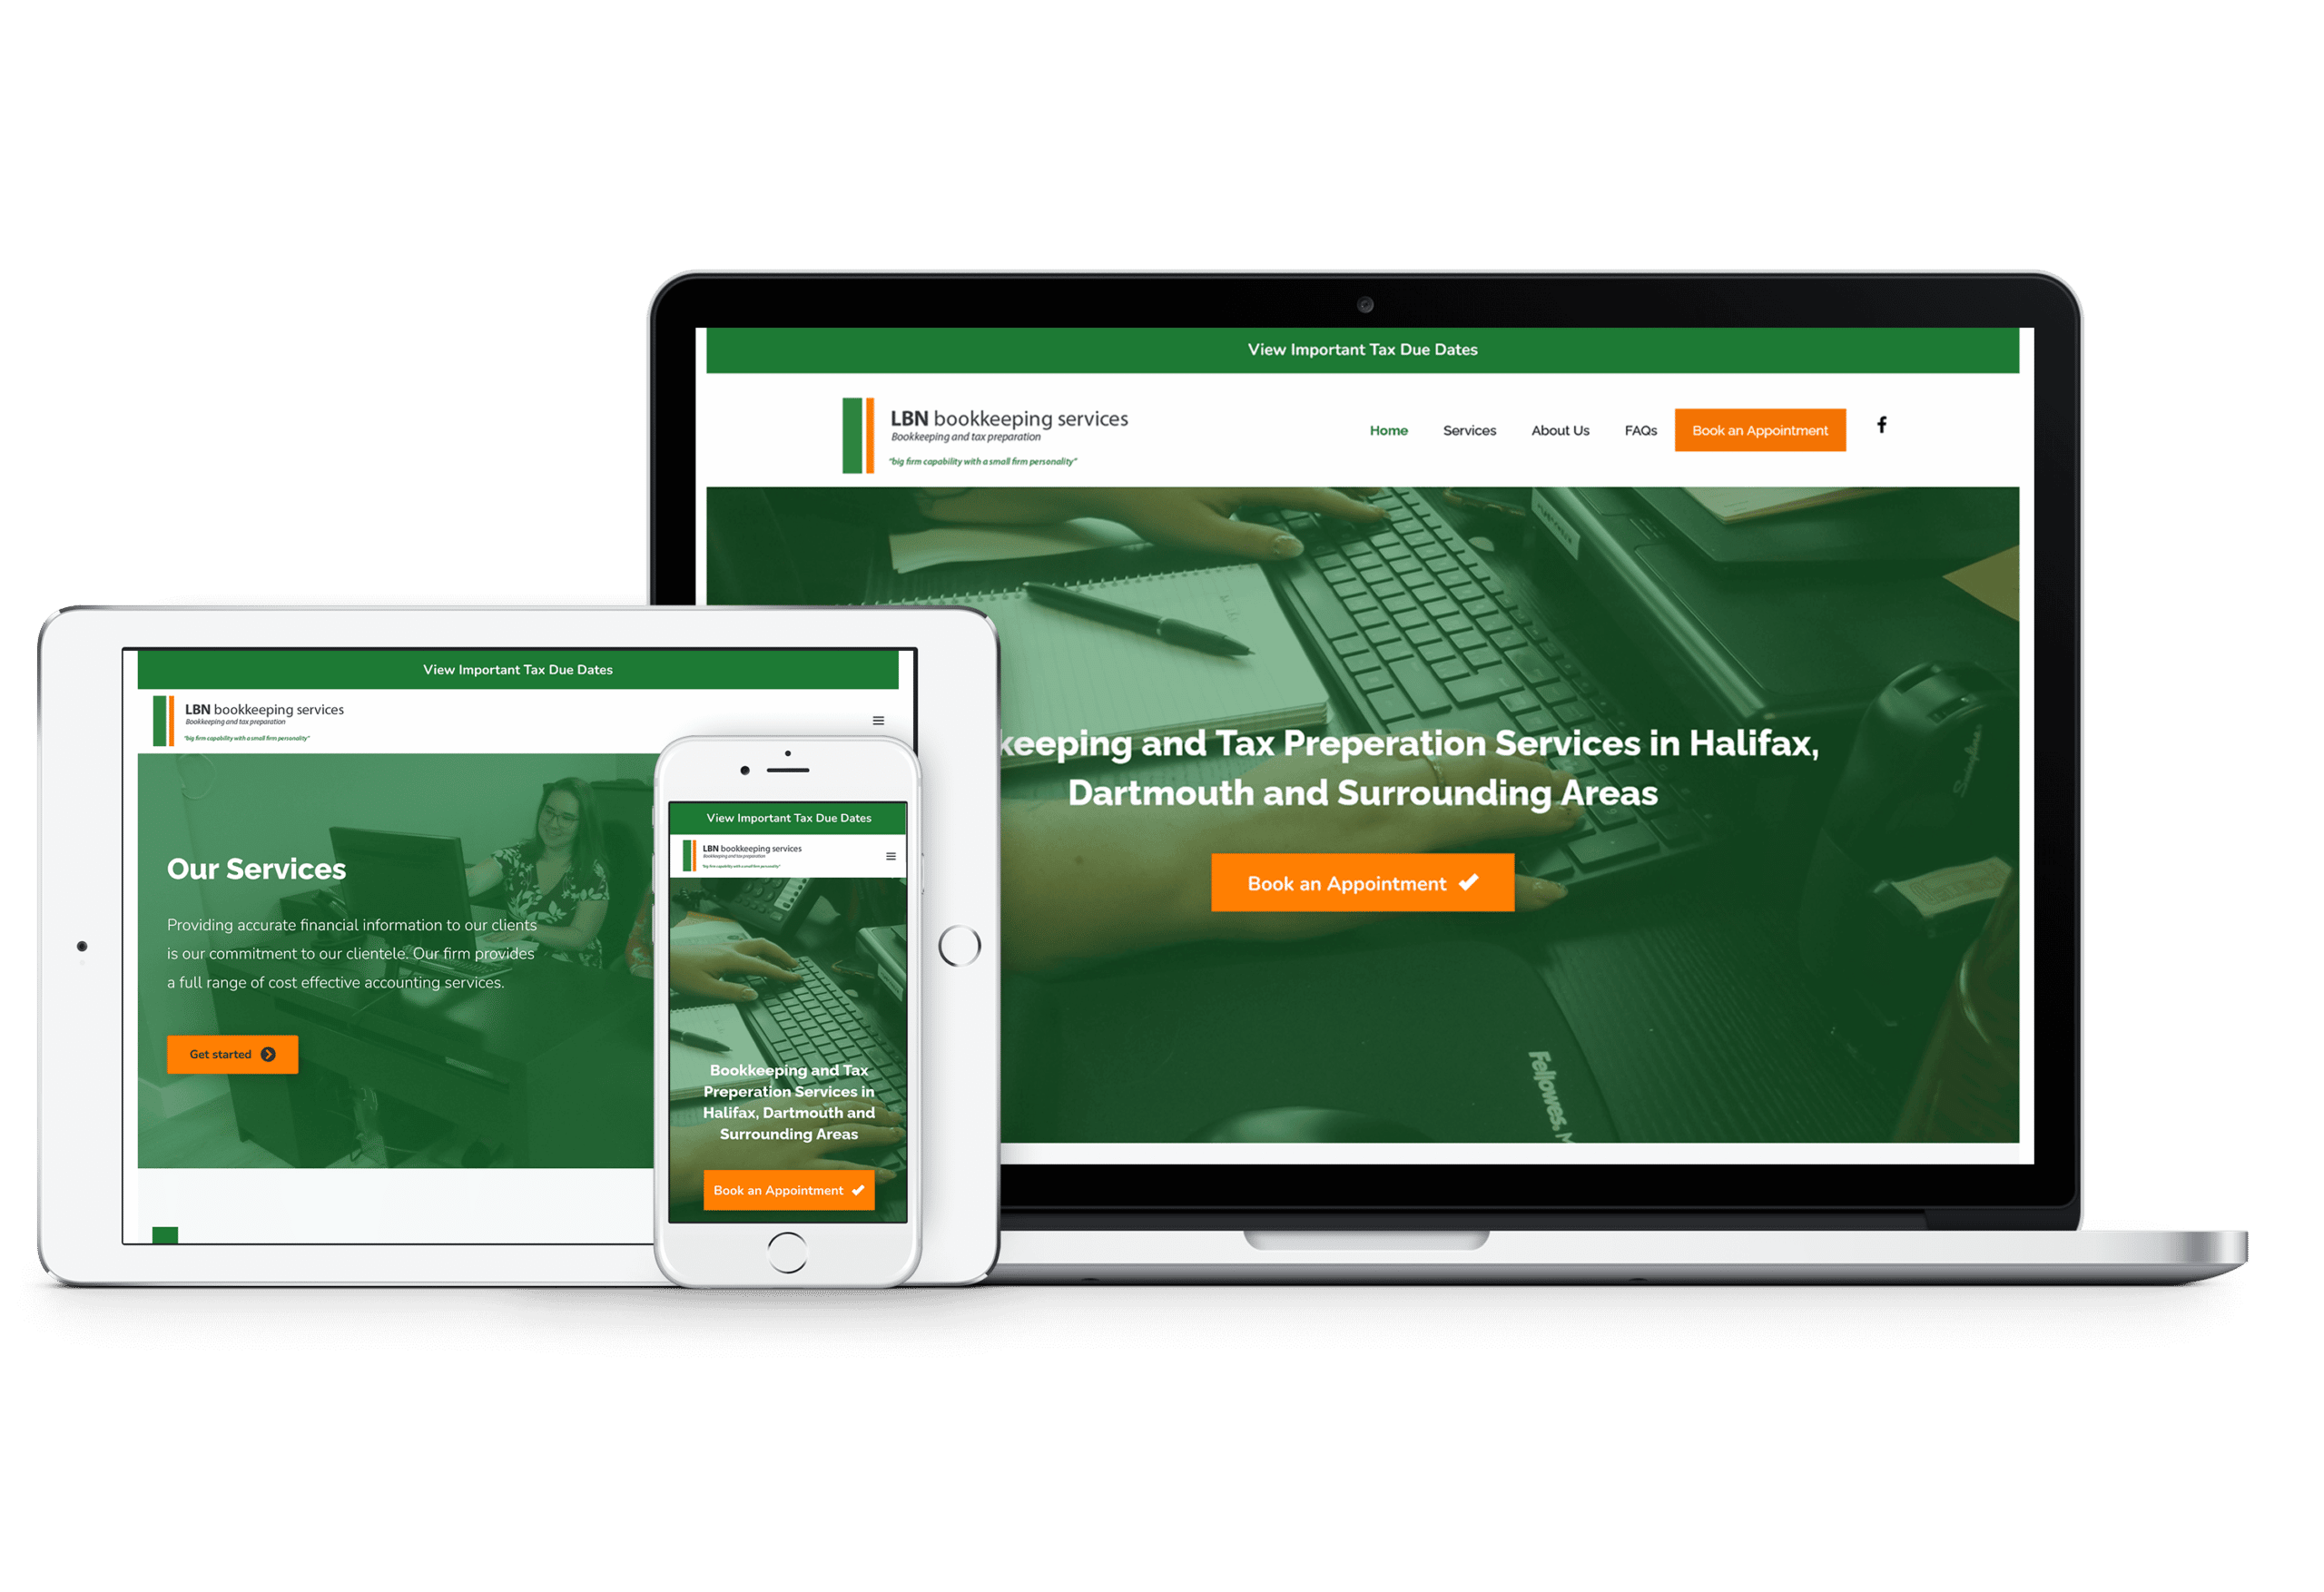 LBN bookkeeping services WordPress Website Redesign